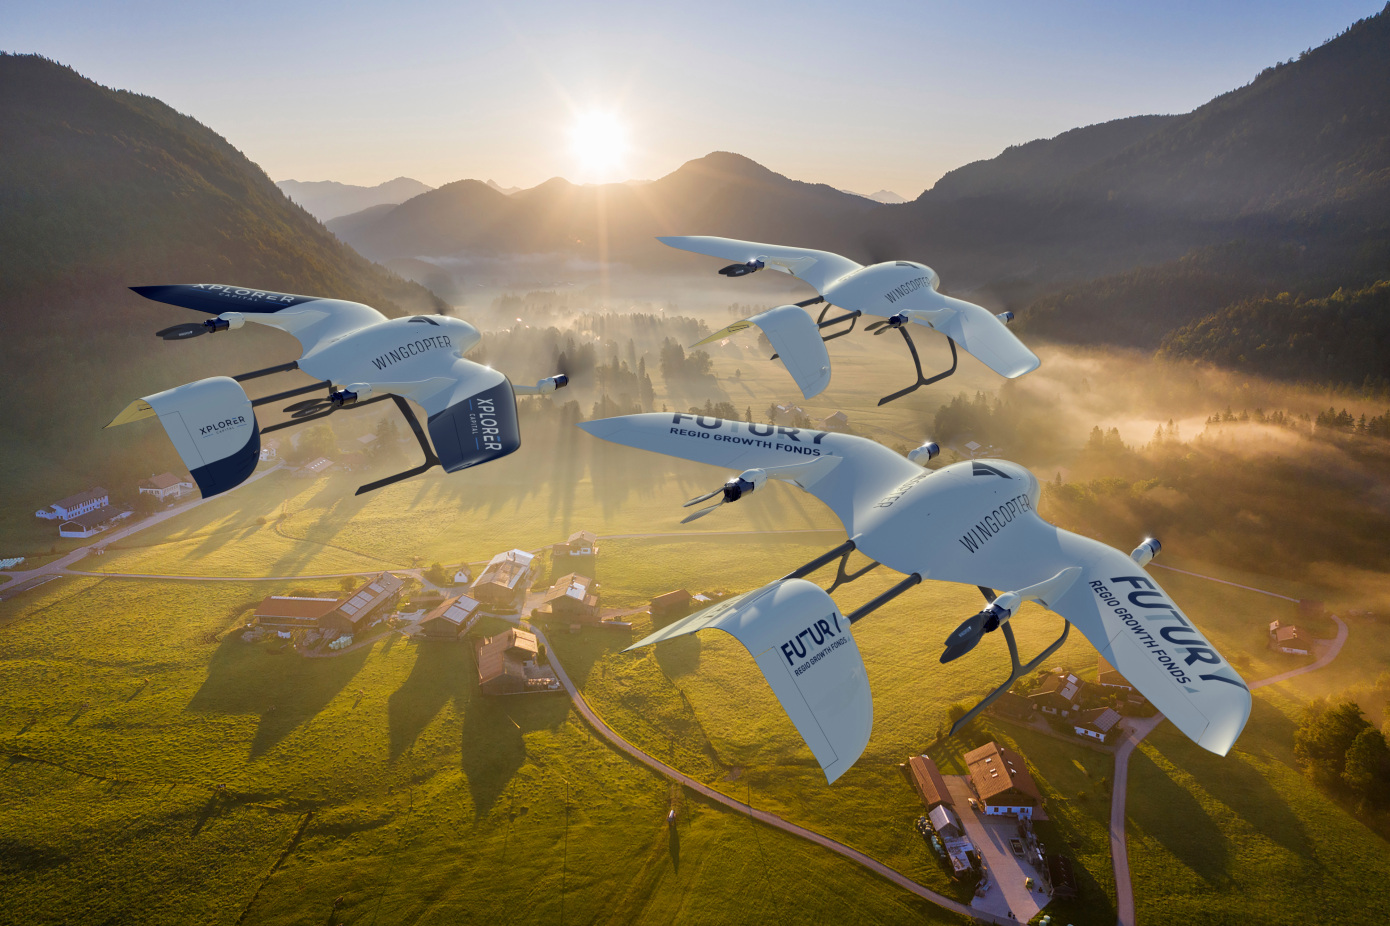 Wingcopter raises $22 million to expand U.S.